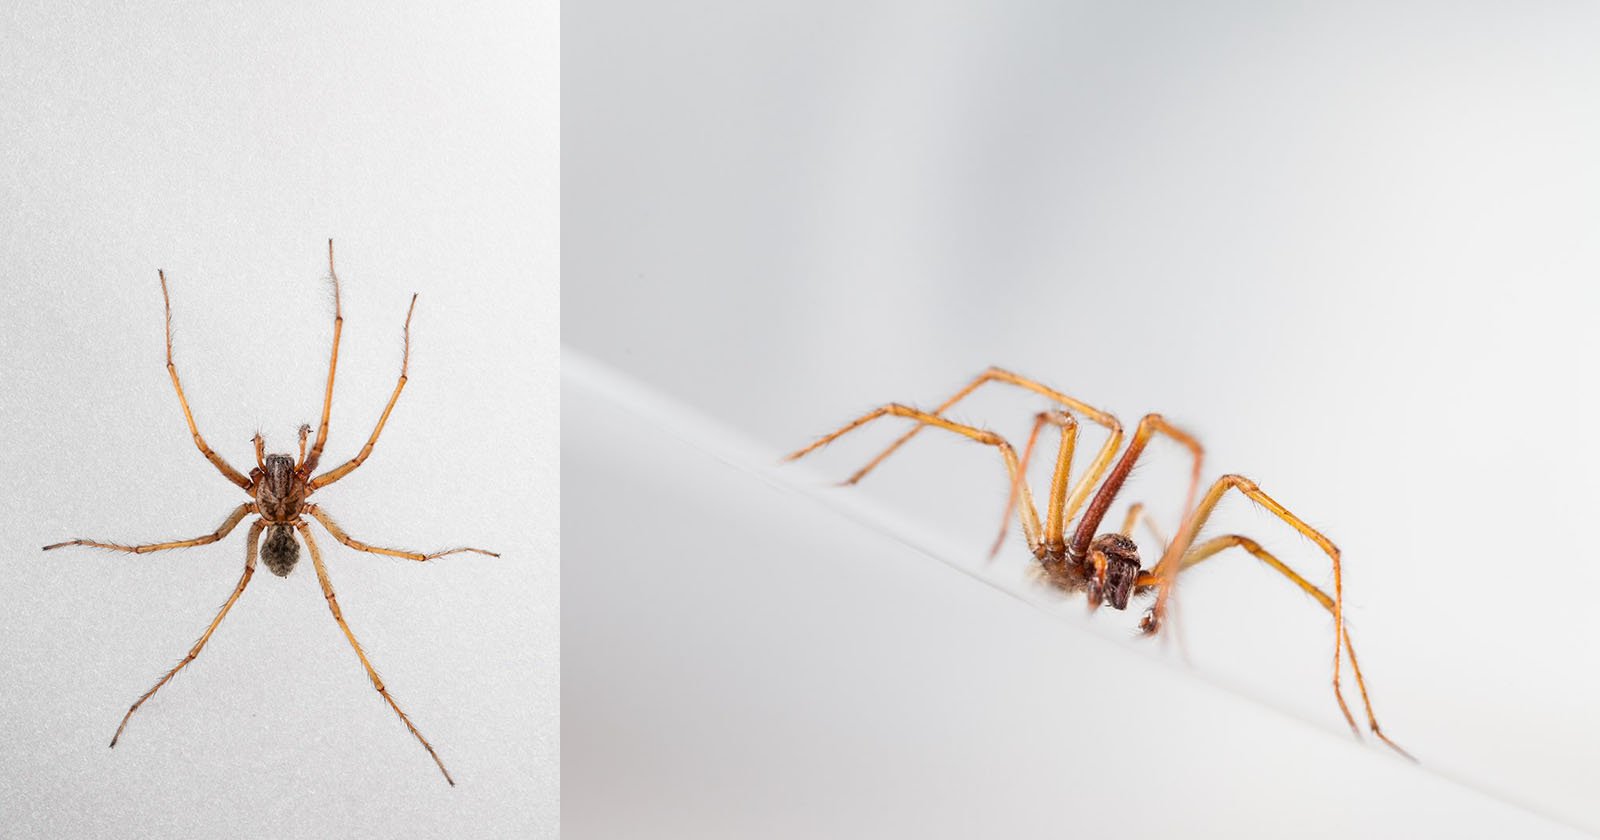 Why is a daddy's long leg not a spider? - Quora